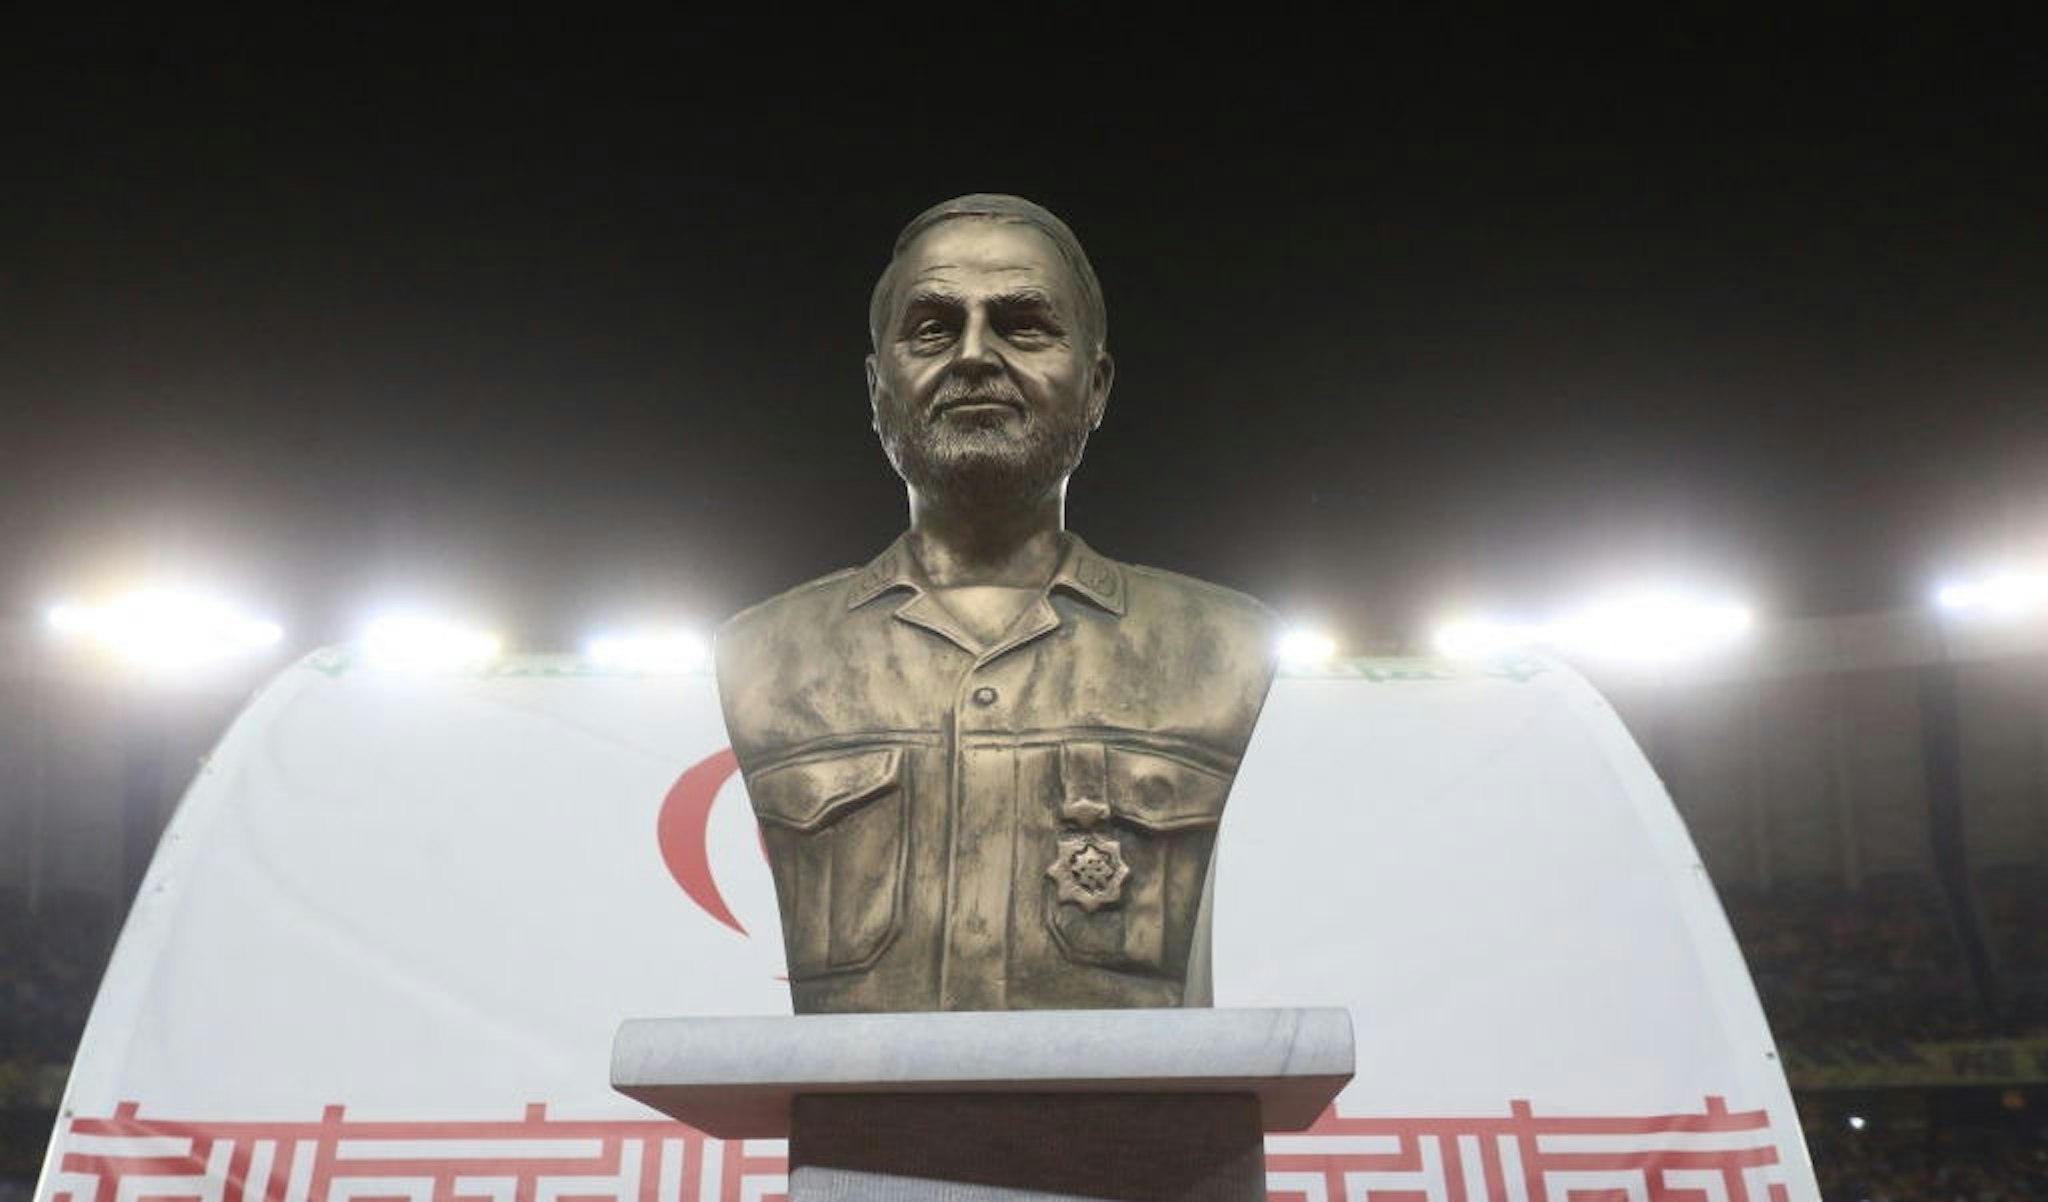 A bust of slain Iranian Revolutionary Guards (IRGC) commander Qasem Soleimani is displayed before the pitch at the Naghsh-e-Jahan Stadium in Isfahan during the AFC Champions League Group C football match between Iran's Sepahan and Saudi Arabia's Al-Ittihad on October 2, 2023. (Photo by MORTEZA SALEHI/TASNIM NEWS/AFP via Getty Images)